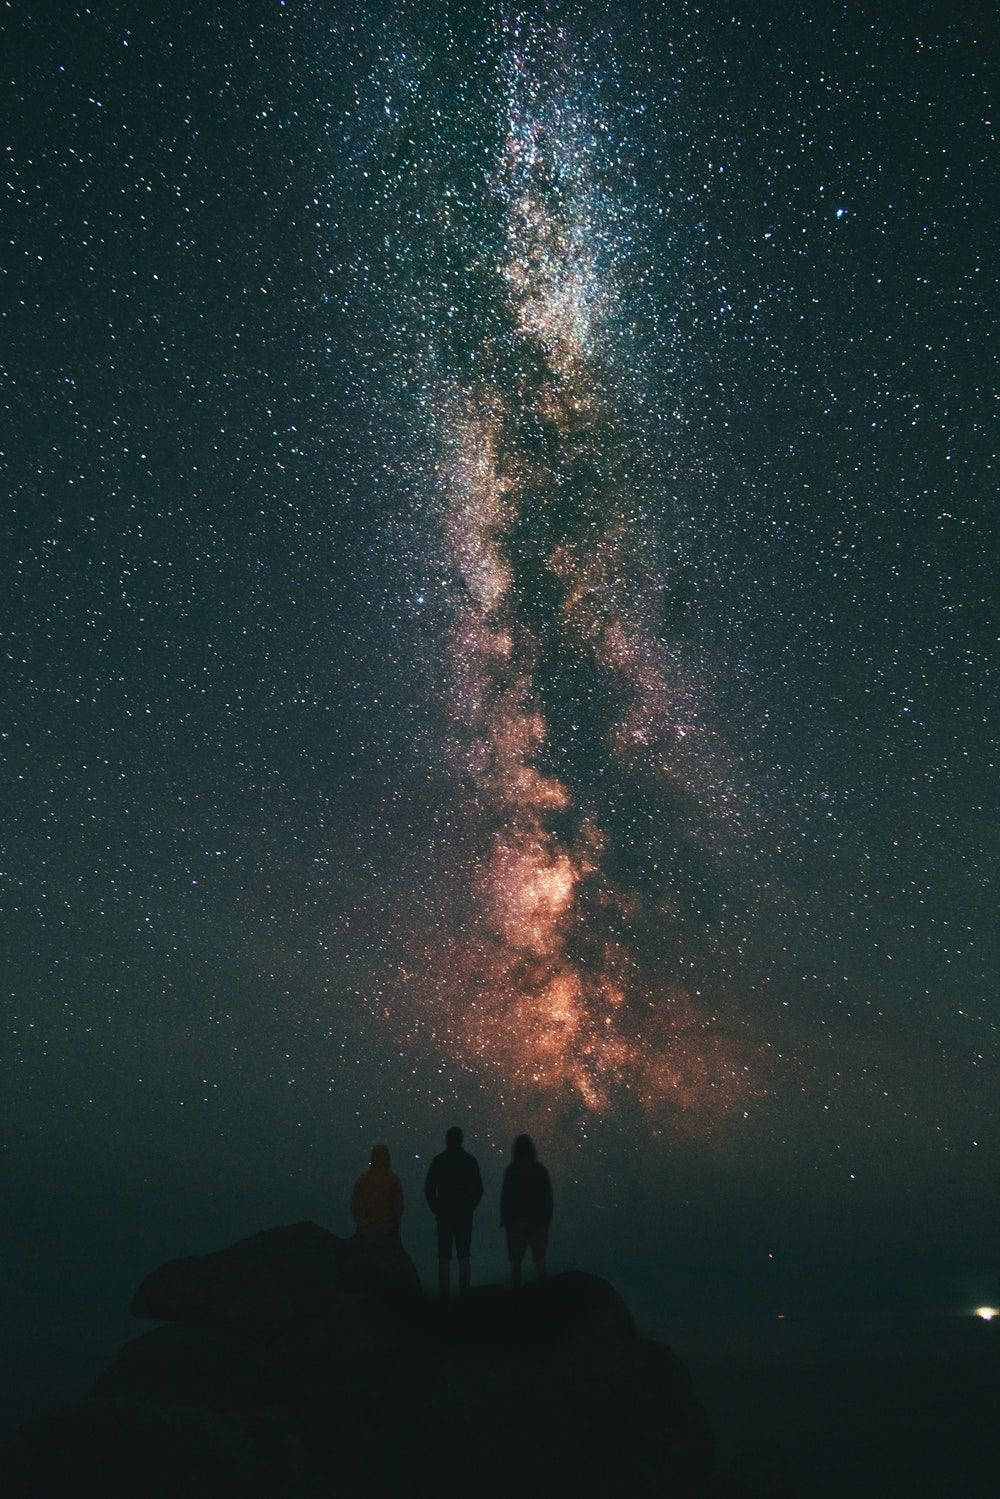 “Explore the Galaxy with Android” Wallpaper